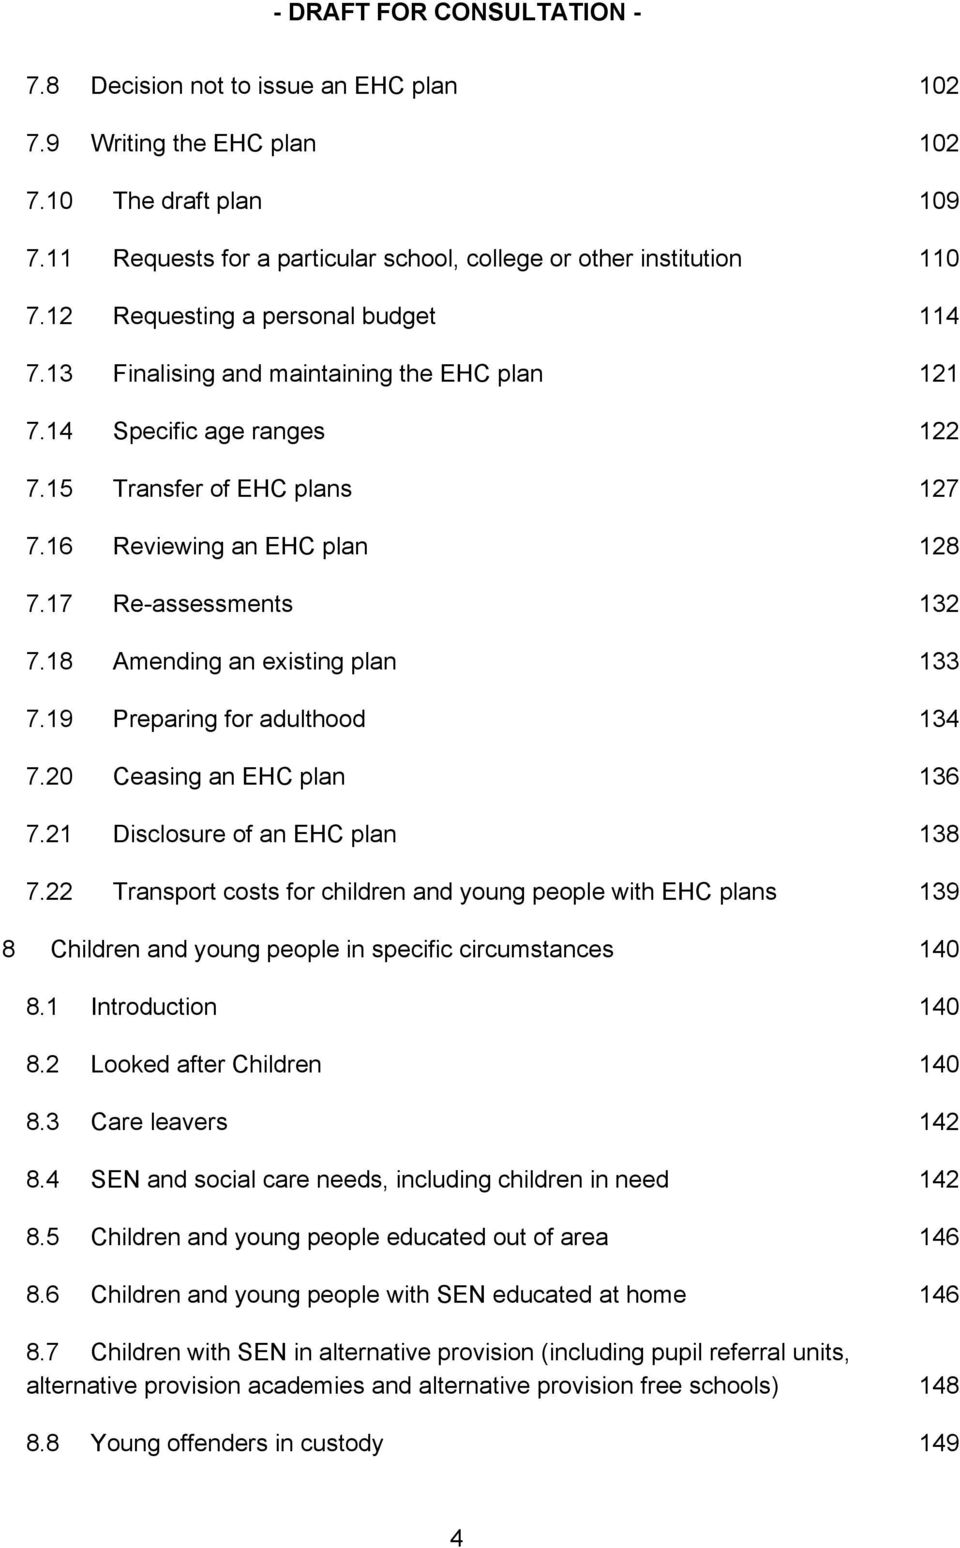 17 Re-assessments 132 7.18 Amending an existing plan 133 7.19 Preparing for adulthood 134 7.20 Ceasing an EHC plan 136 7.21 Disclosure of an EHC plan 138 7.